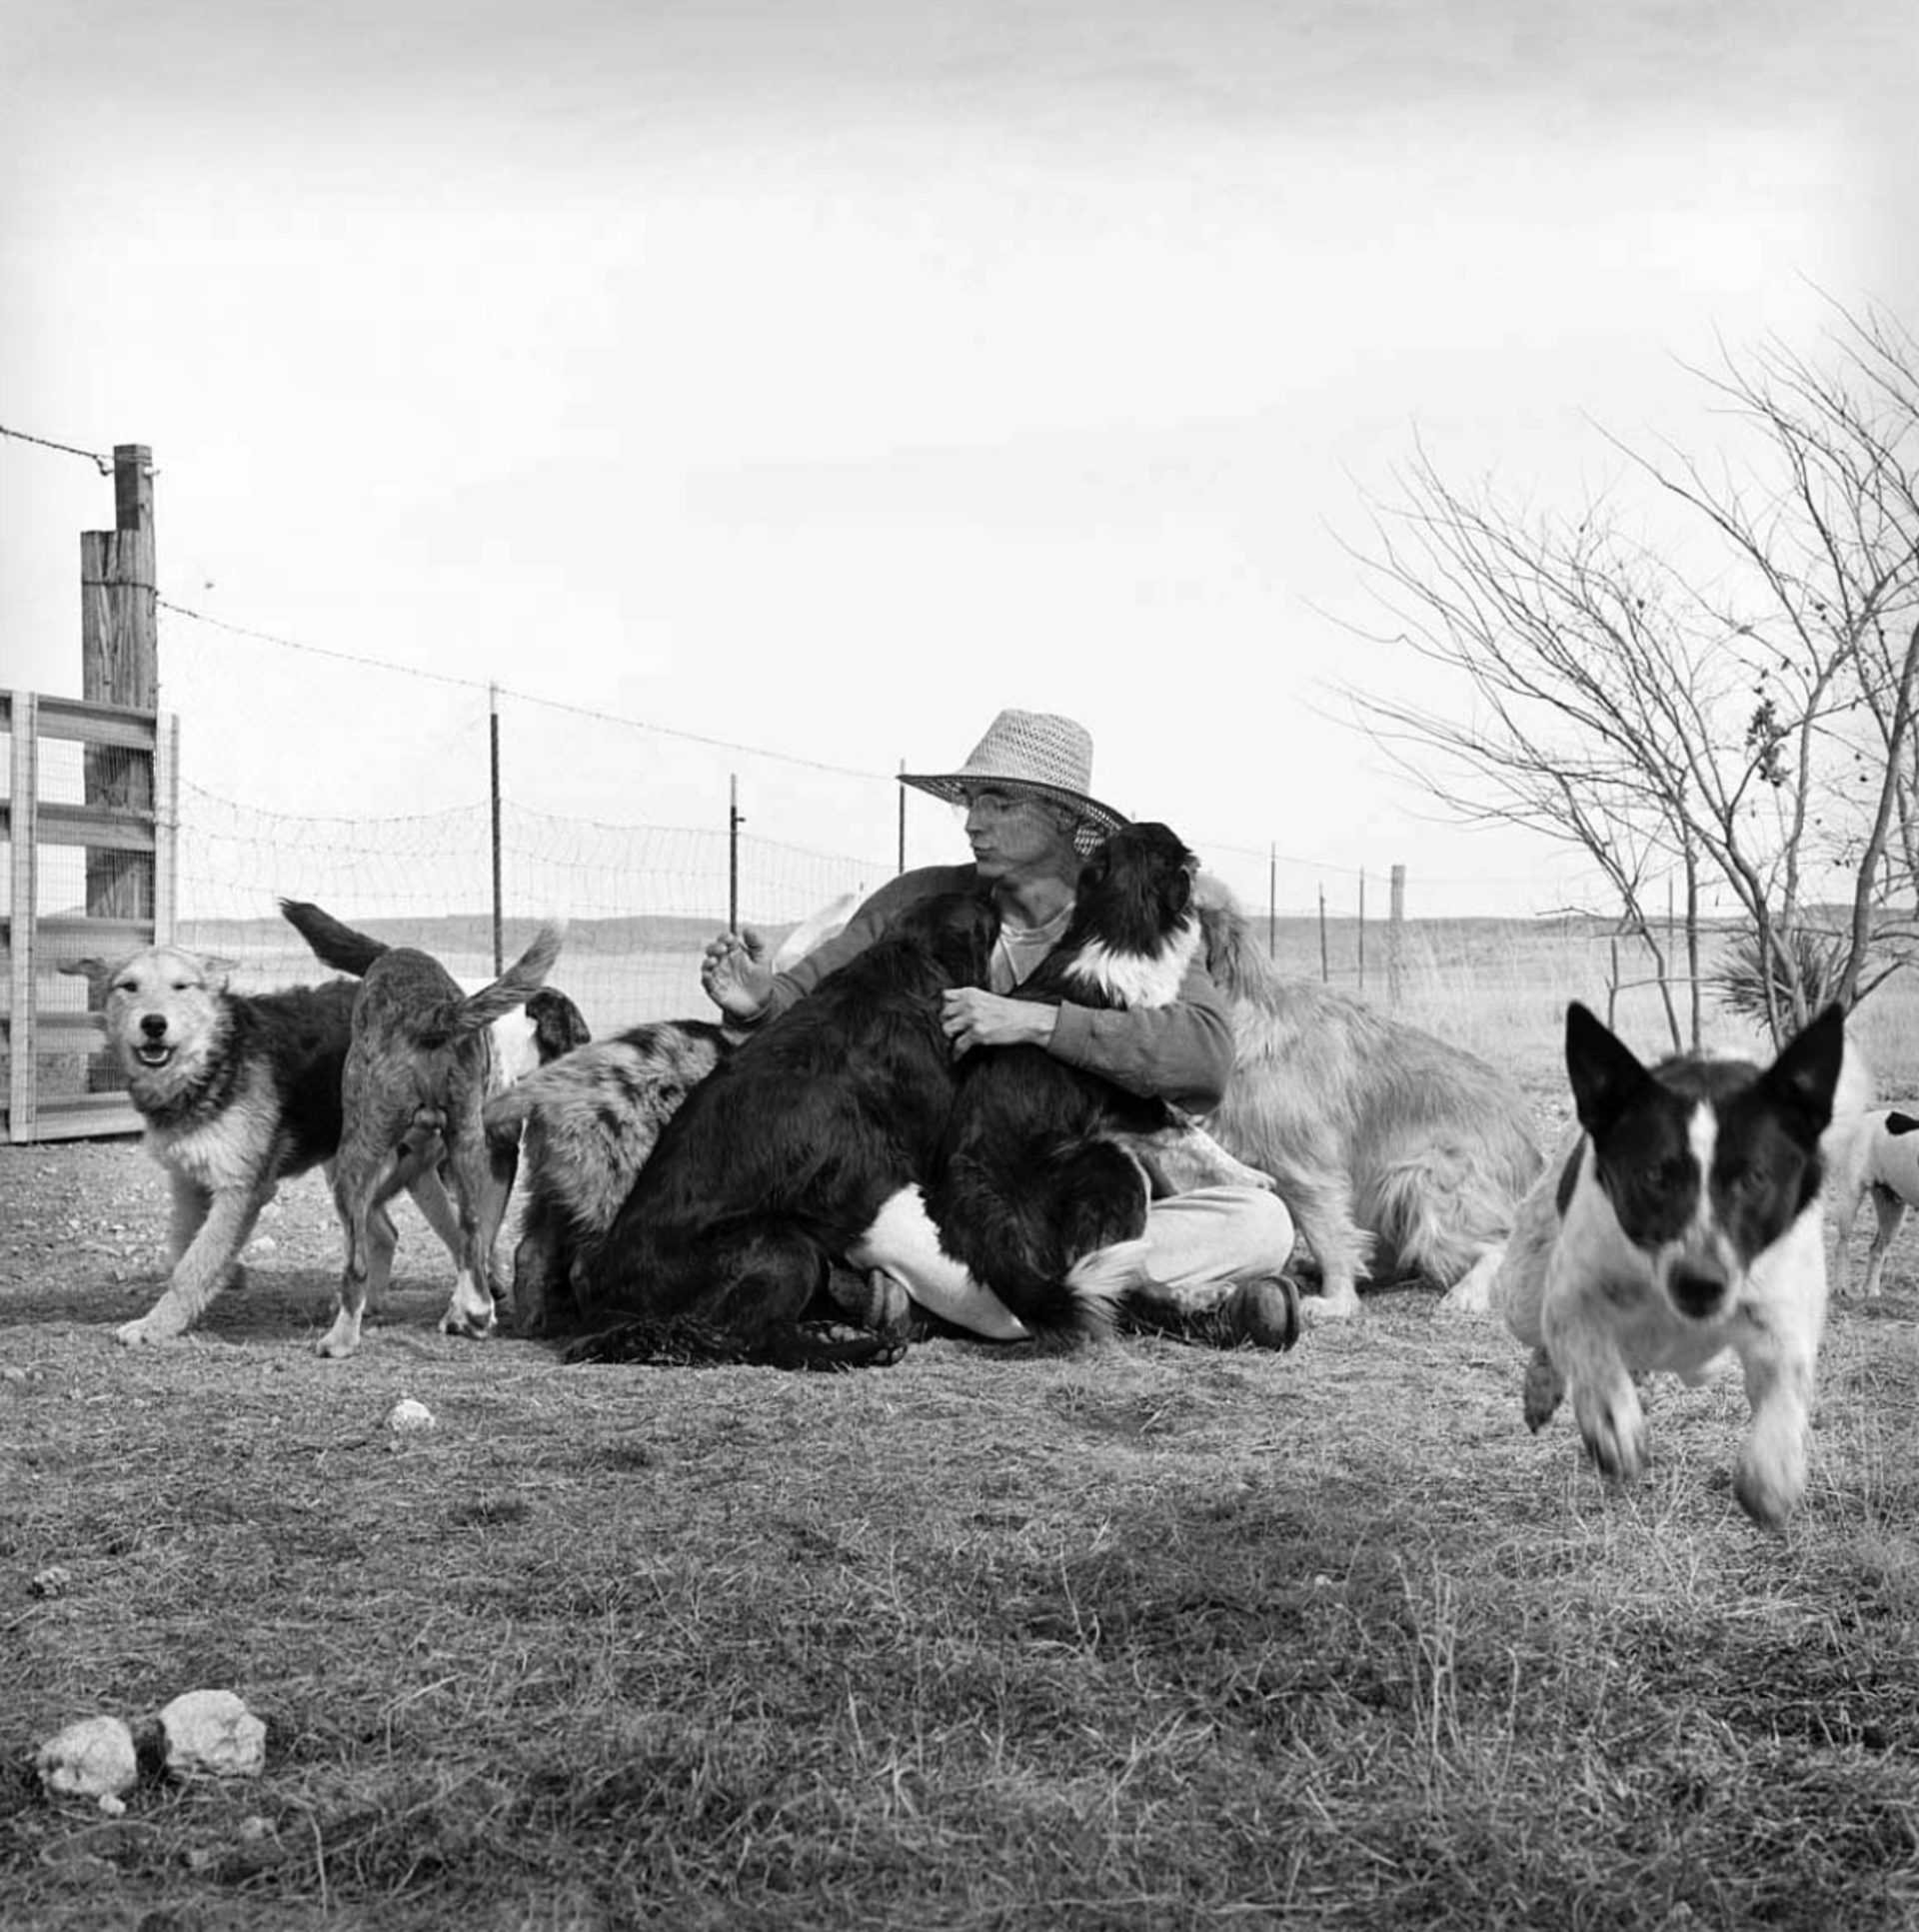 Lineaus Lorette with all his Dogs by James H. Evans